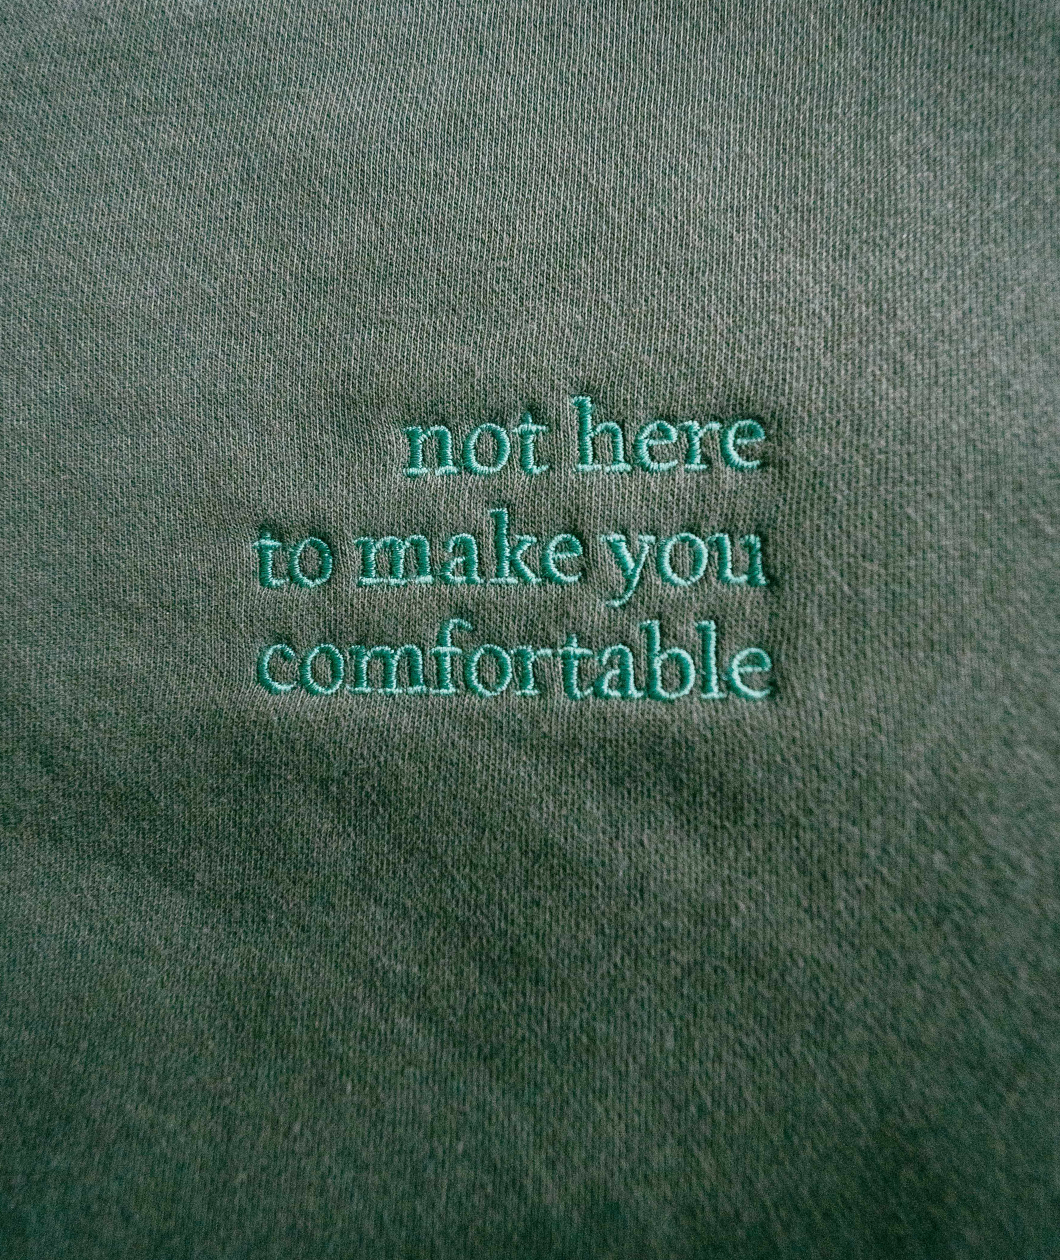 “not hear to make you comfortable” embroidered in green serif font on a green swater - from Iz Harris